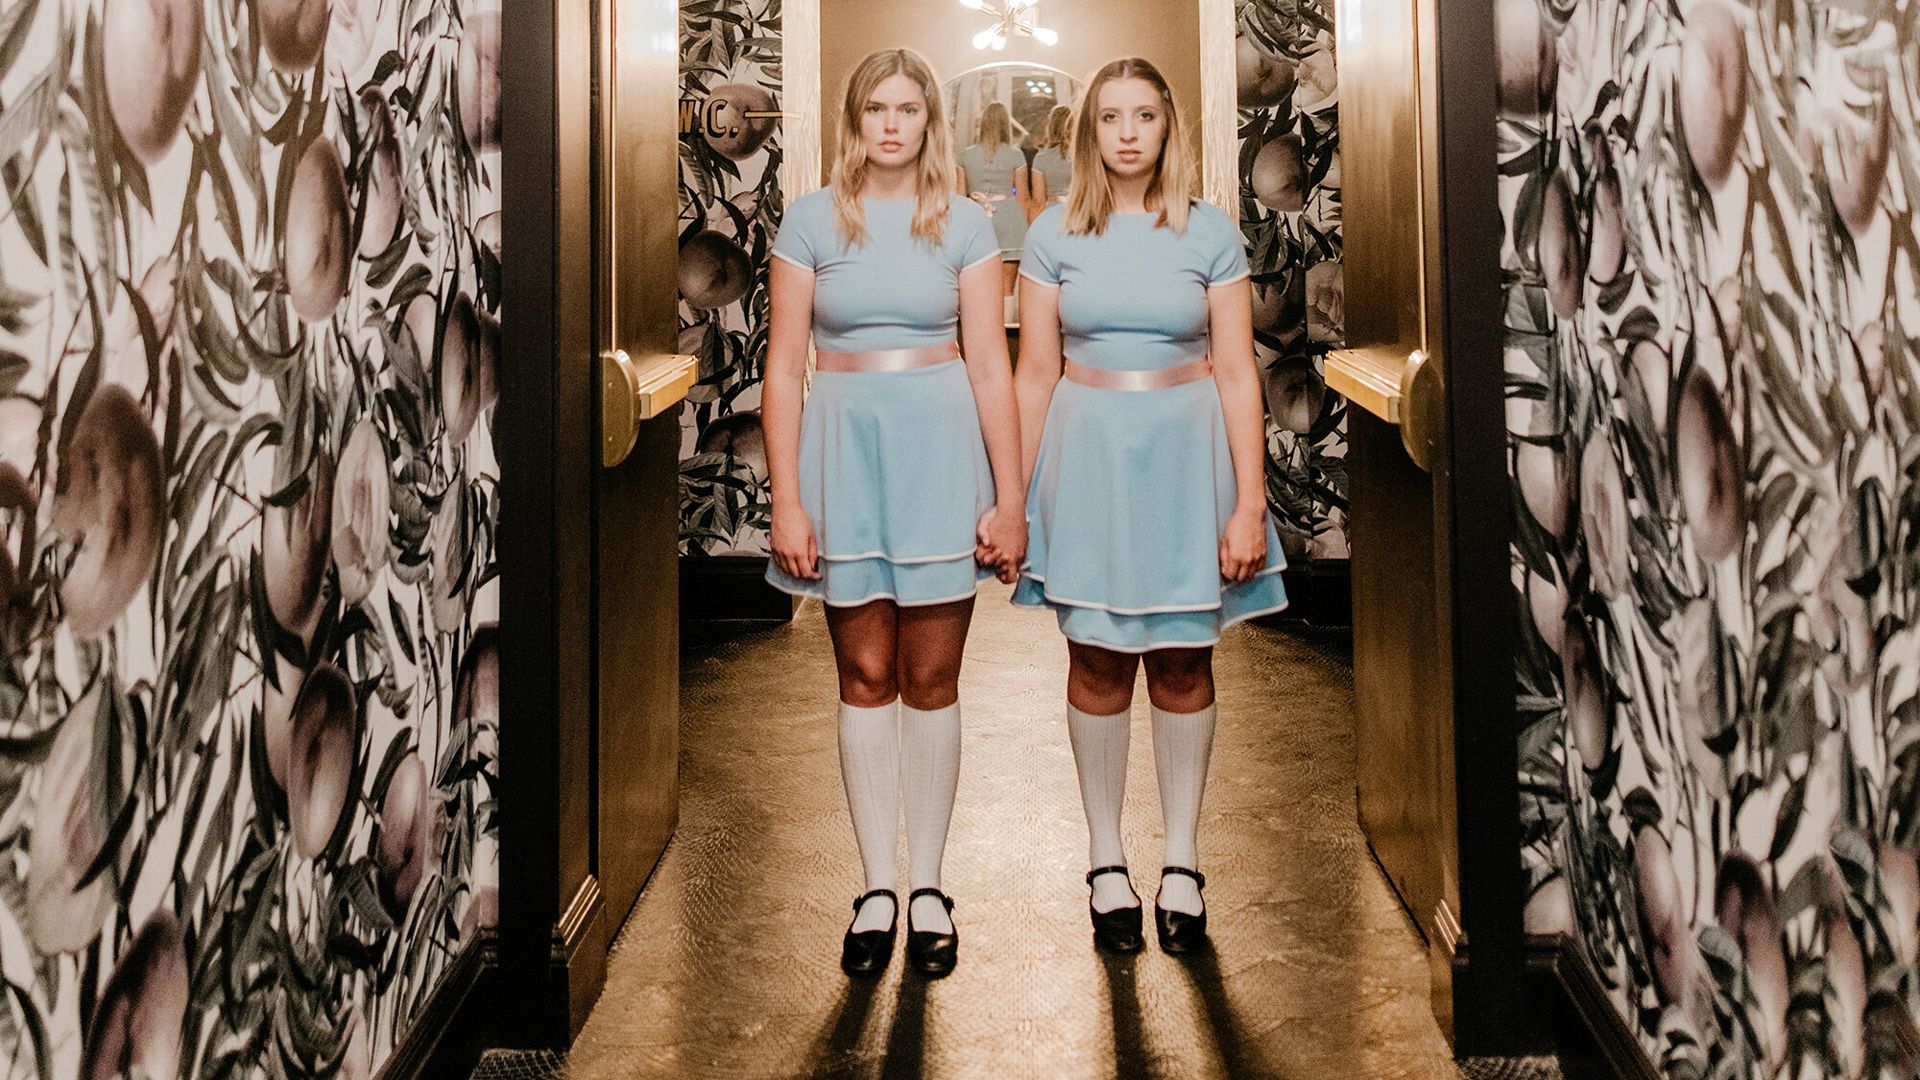 A photo of two blond women recreating the iconic scene of two twins standing in a long hallway in The Shining. 